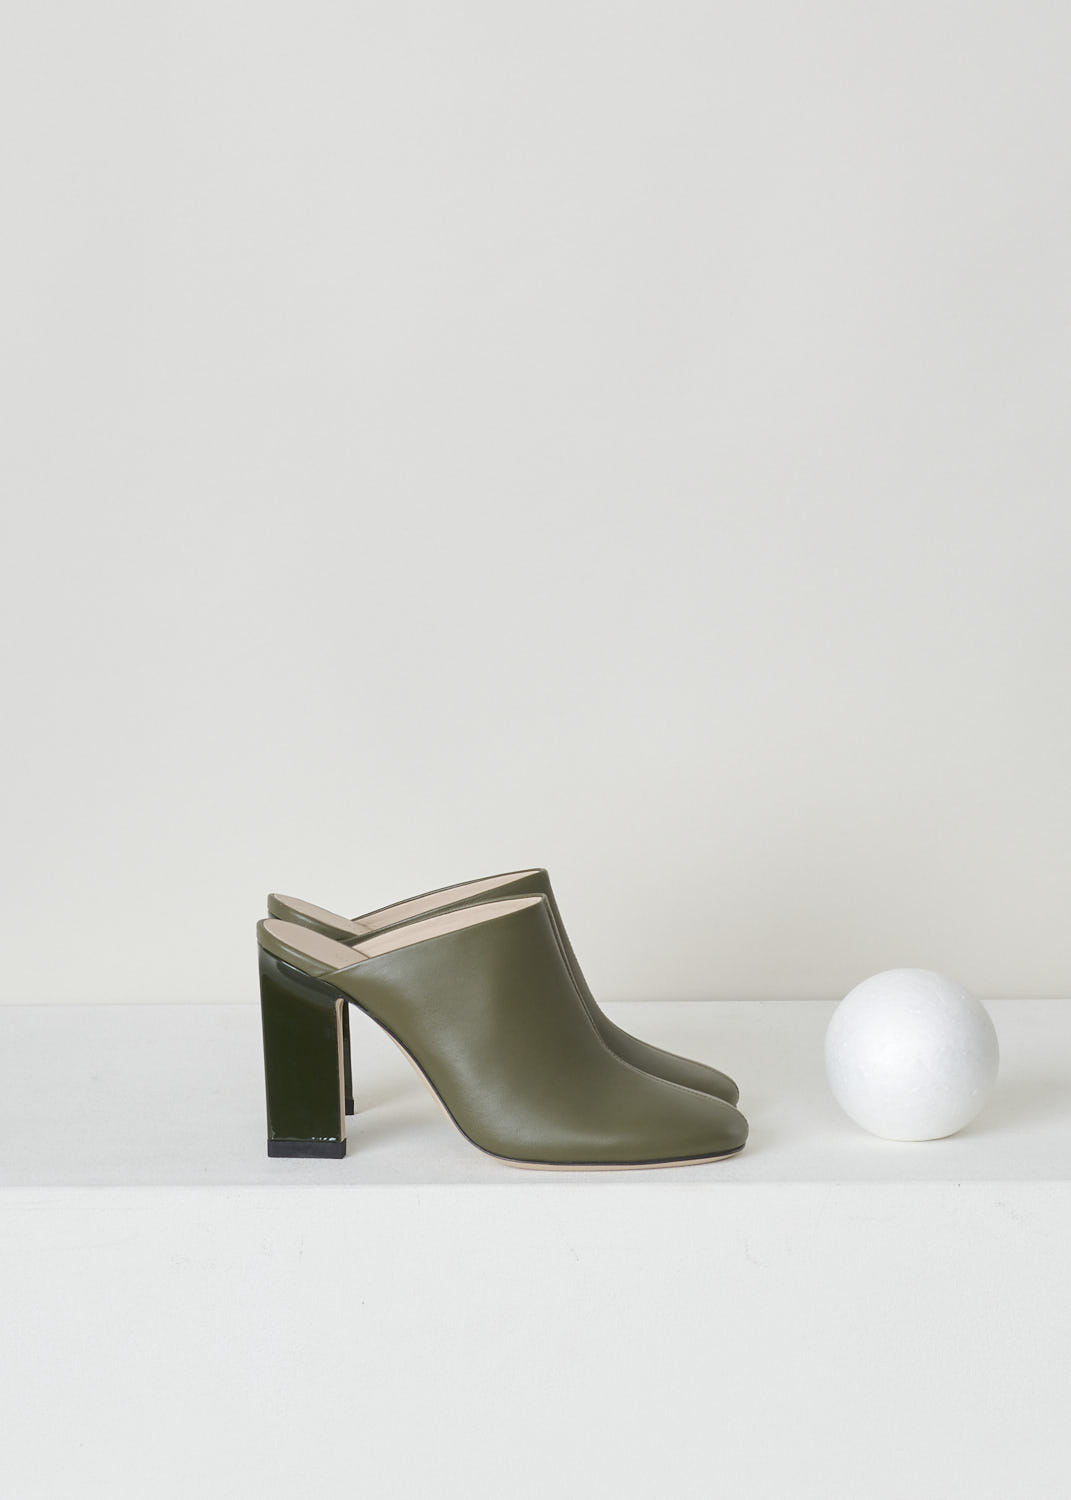 WANDLER, OLIVE GREEN MULES WITH BLOCK HEEL, CASTA_MULE_20210_341201_2629_OLIVE, Green, Side, These olive green slip-in mules feature a rectangular block heel and a round toe. A decorative seam runs along the front of the shoe.

Heel height: 9.5 cm / 3.7 inch 

